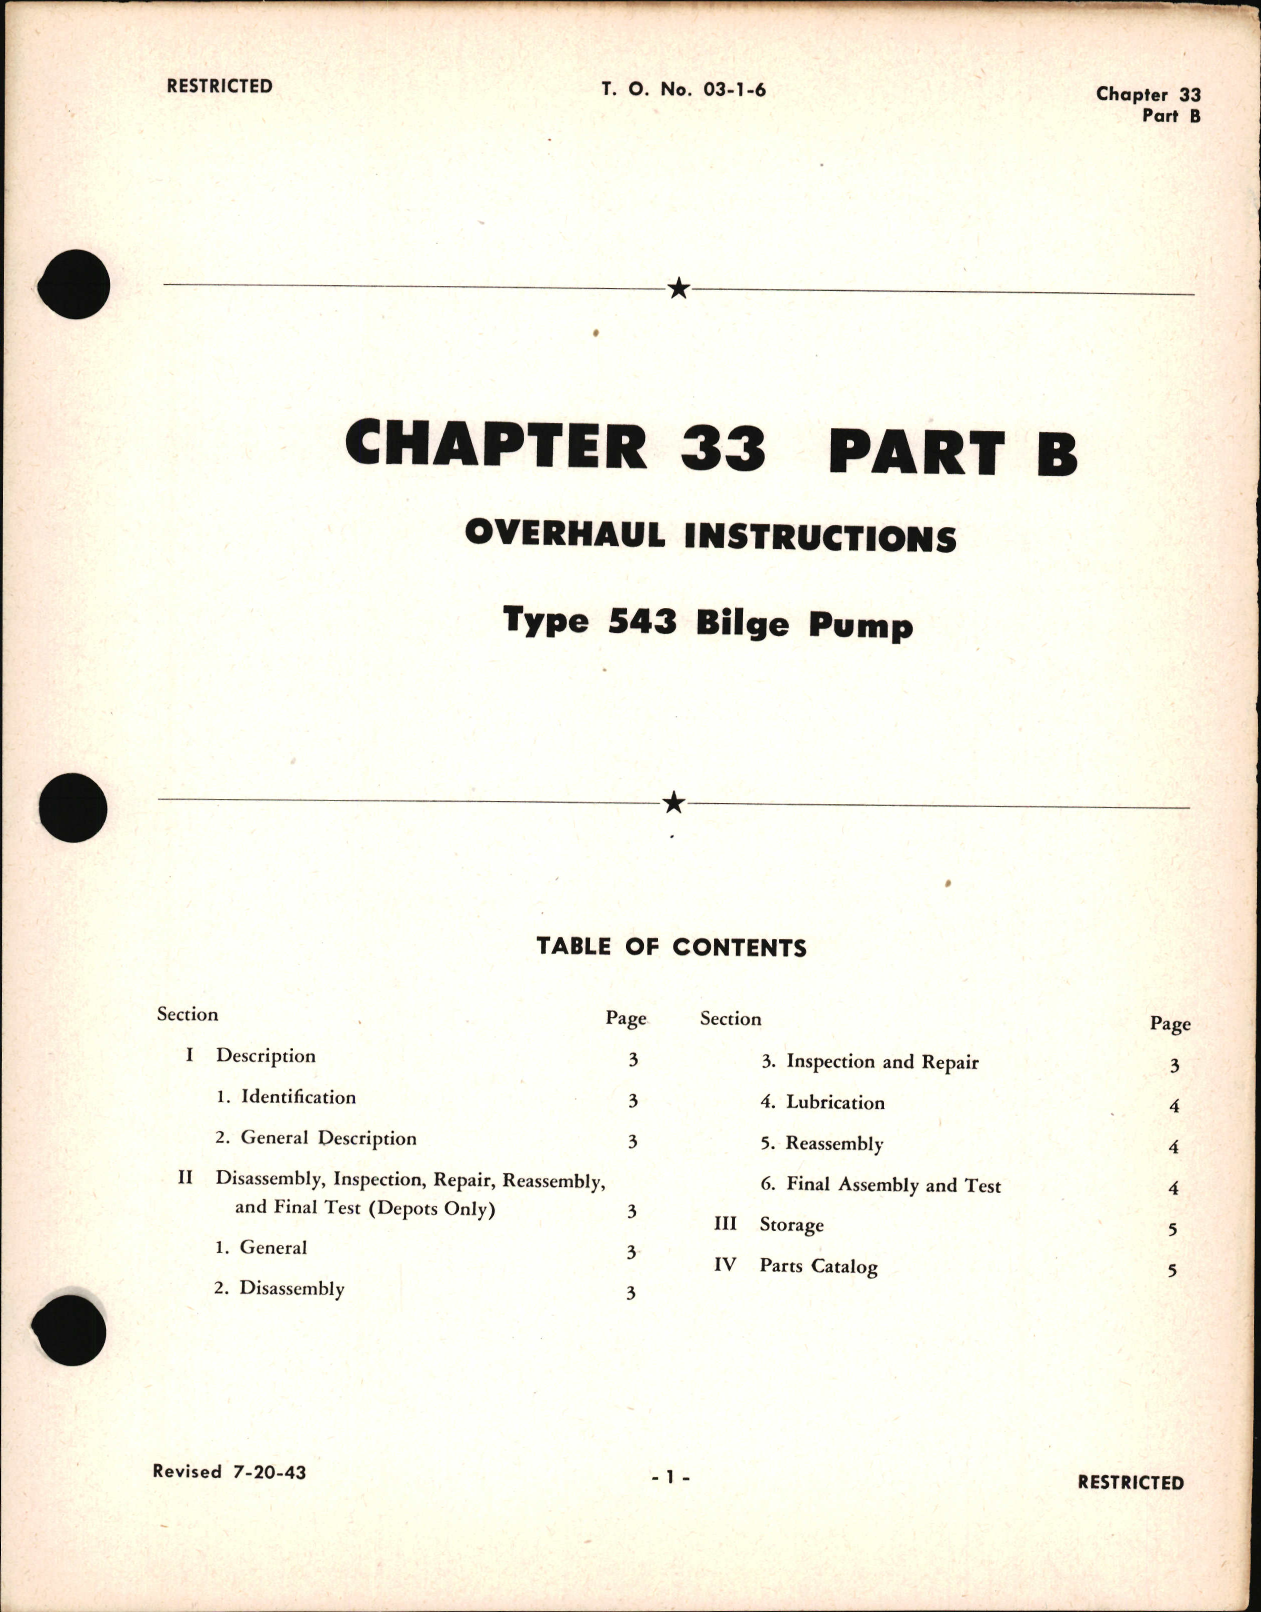 Sample page 1 from AirCorps Library document: Overhaul Instructions for Type 543 Bilge Pump, Chapter 33 Part B